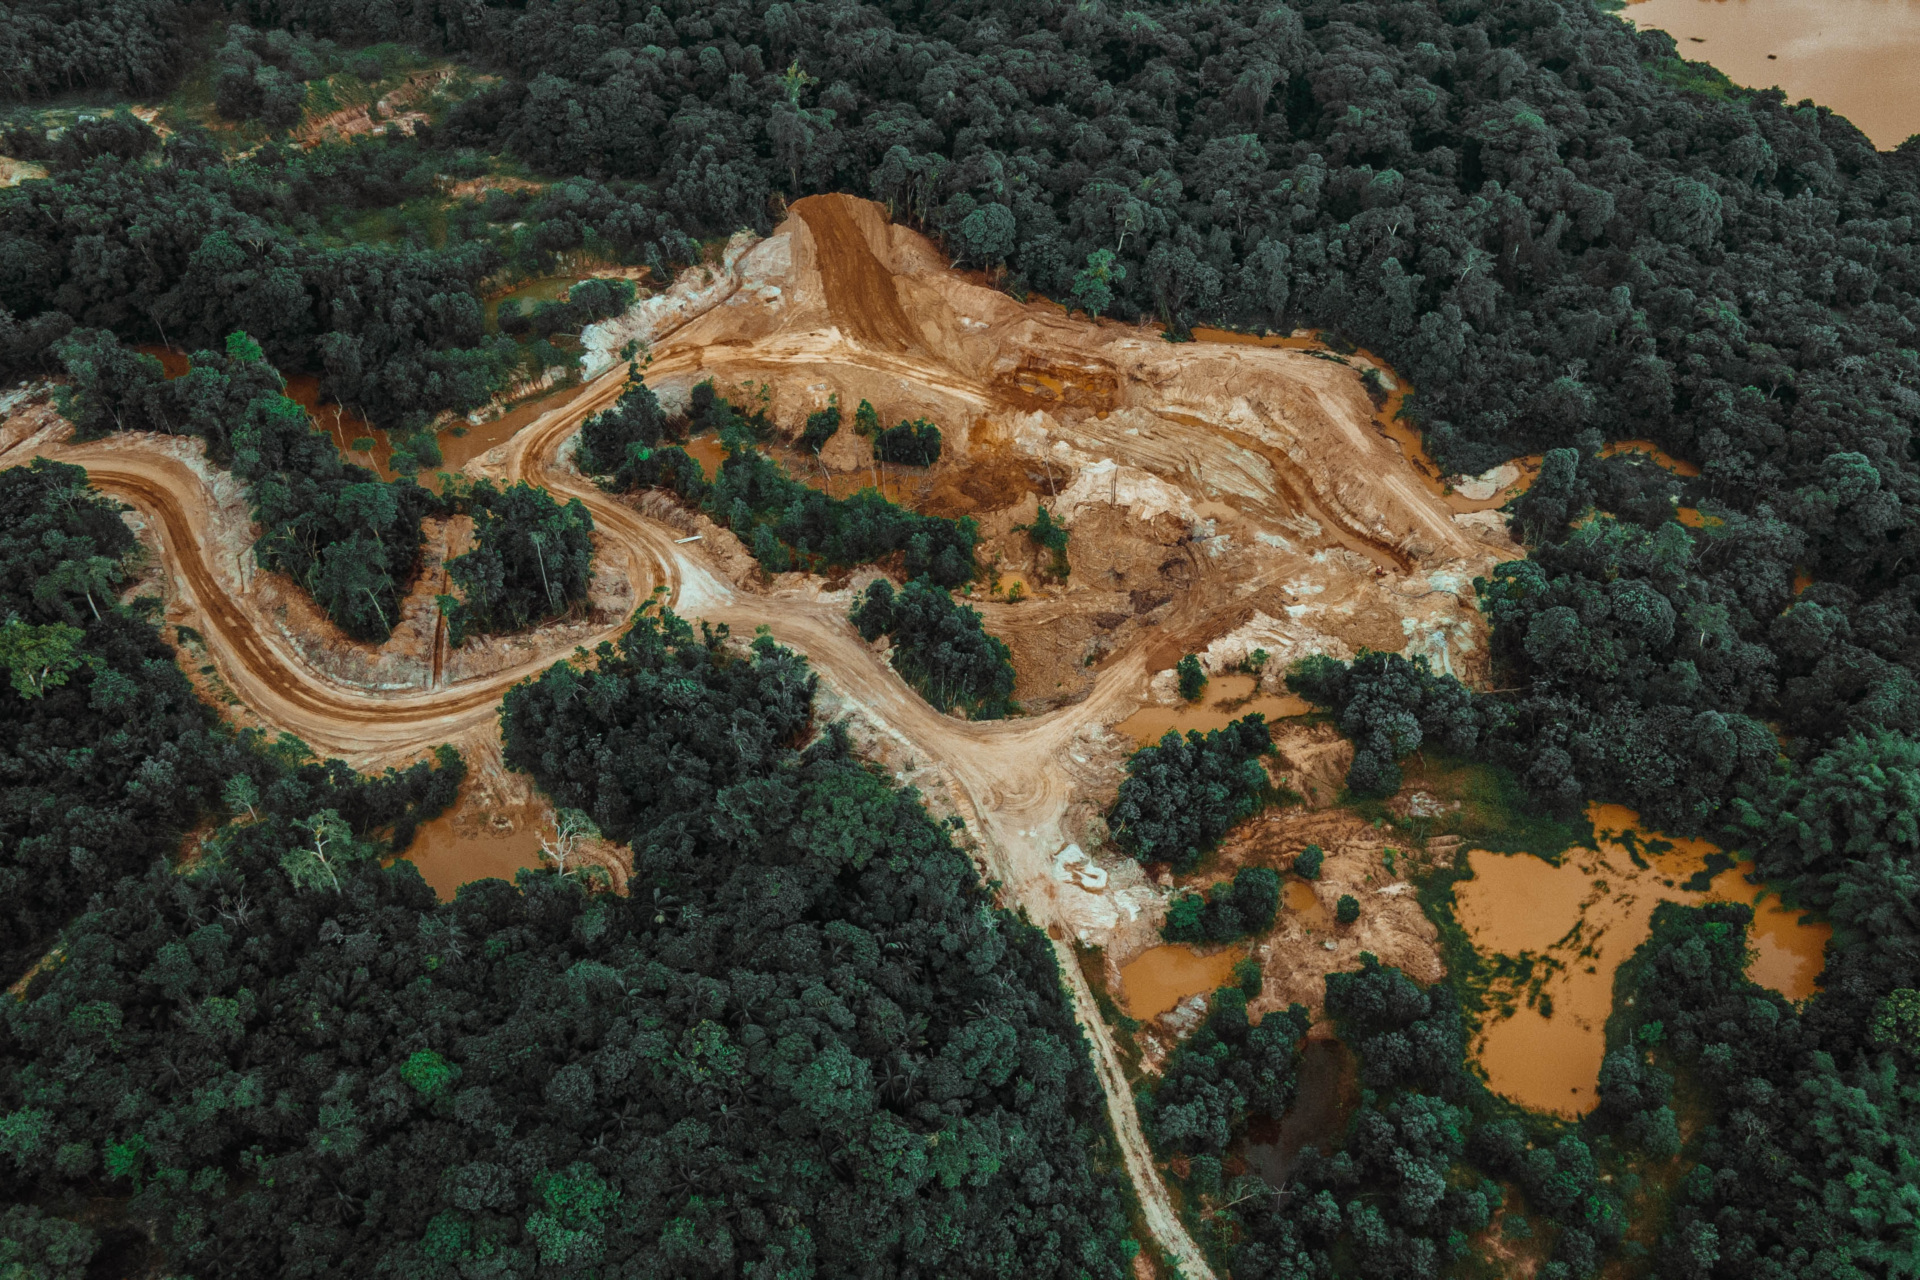 Overhead view of deforested area